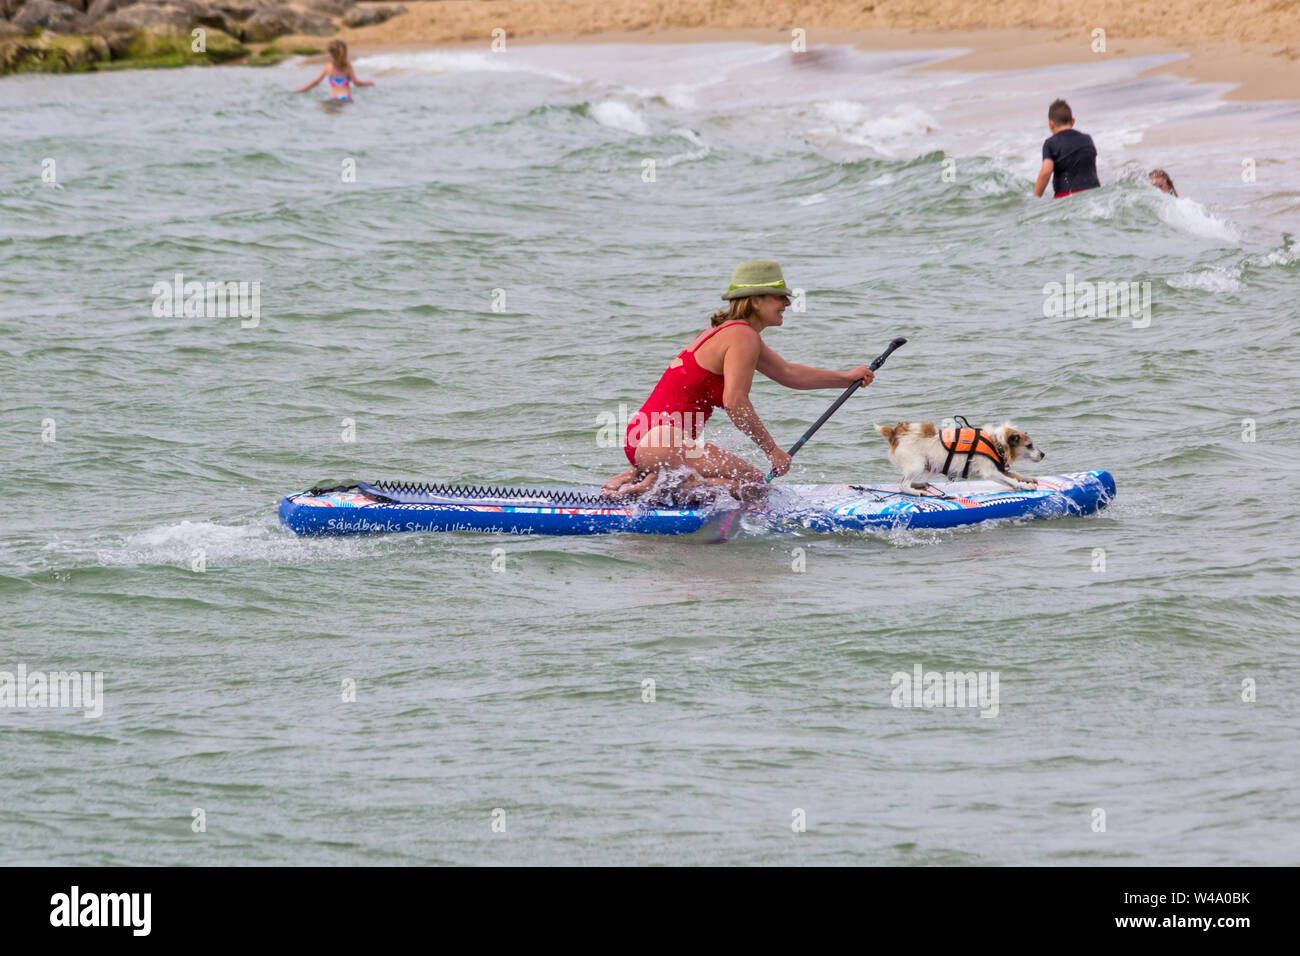 Branksome Dene Chine, Poole, Dorset, UK. 21st July 2019. After the success of last years UKs first Dog Surfing Championships, organised by Shaka Surf, at Branksome Dene Chine beach, the event is held for the second year with even more dogs taking part and surfing and paddleboarding on their boards. Crowds turn out to watch the fun on a breezy day making conditions more challenging. Tilly, the Jack Russell, dog surfing with owner - Tilly on surfboard paddleboard.Credit: Carolyn Jenkins/Alamy Live News Stock Photo